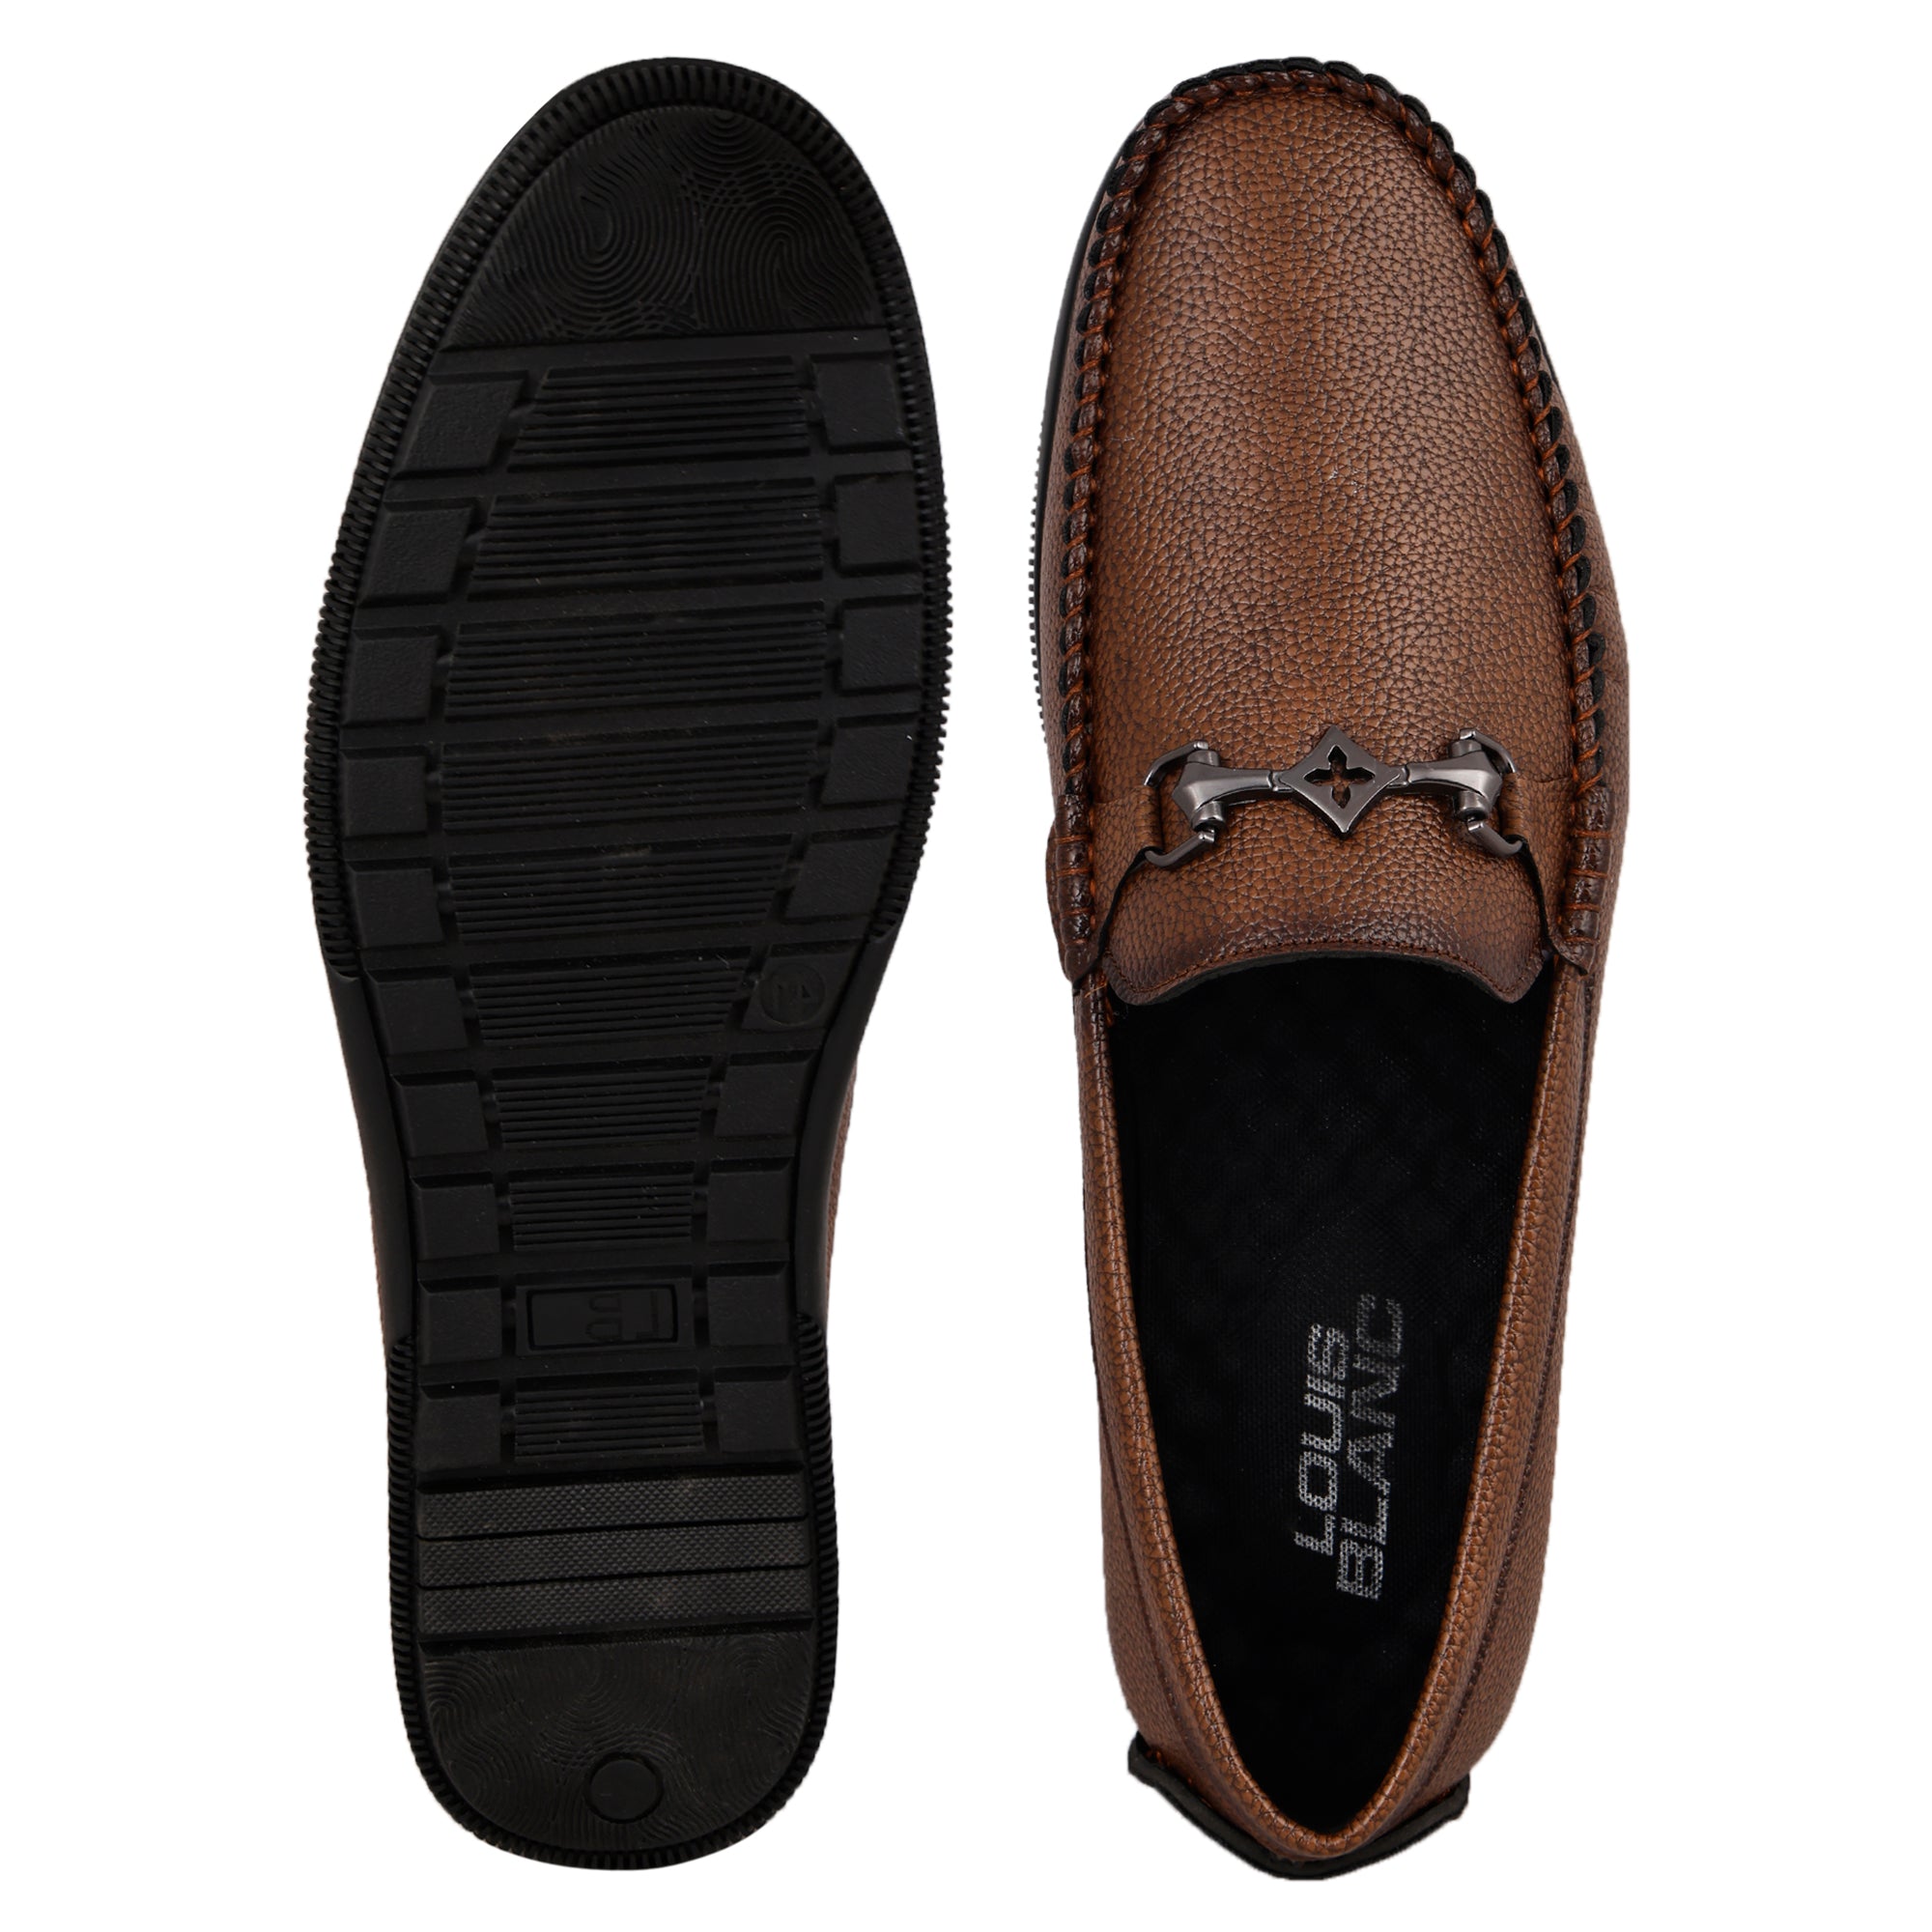 LB 38B DARIO Tan Slip On Style Loafer Most Comfortable Doctor Insole With Wrinkle Free Fox Leather Loafers.